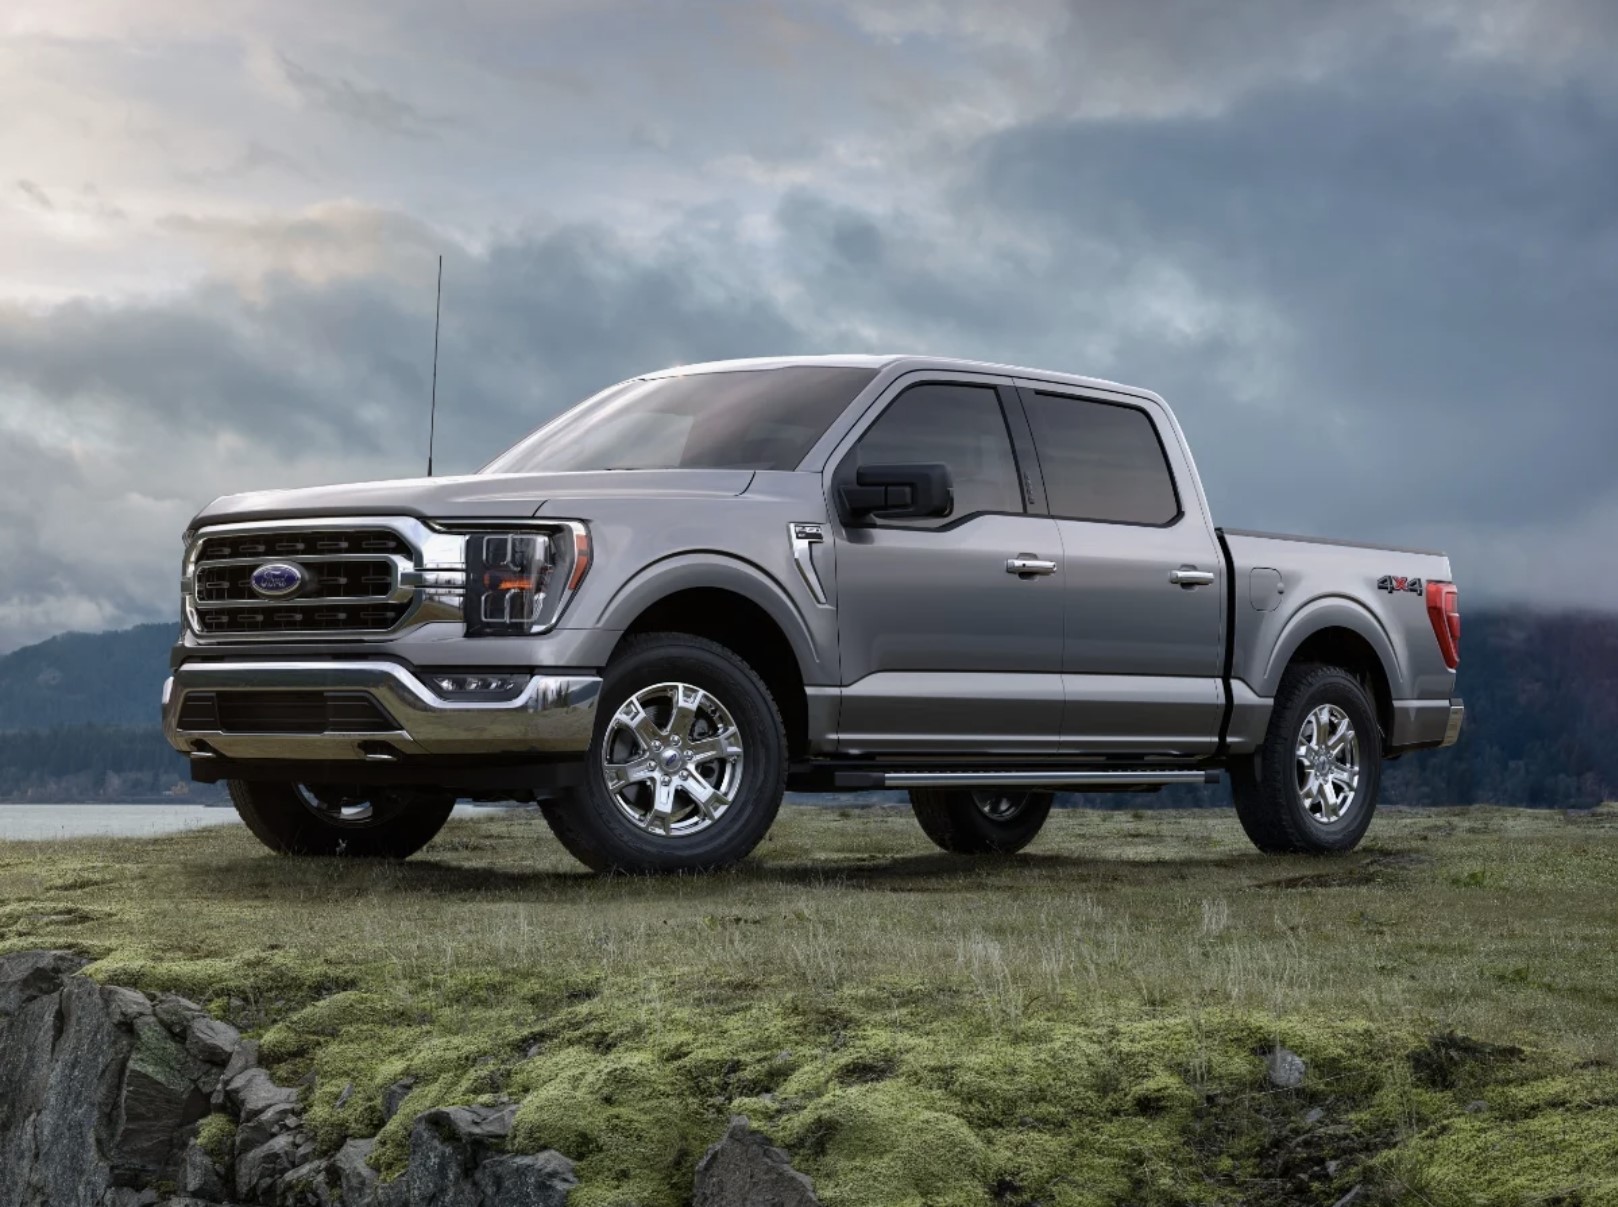 The 2023 Ford F-150 Hybrid parked in the grass